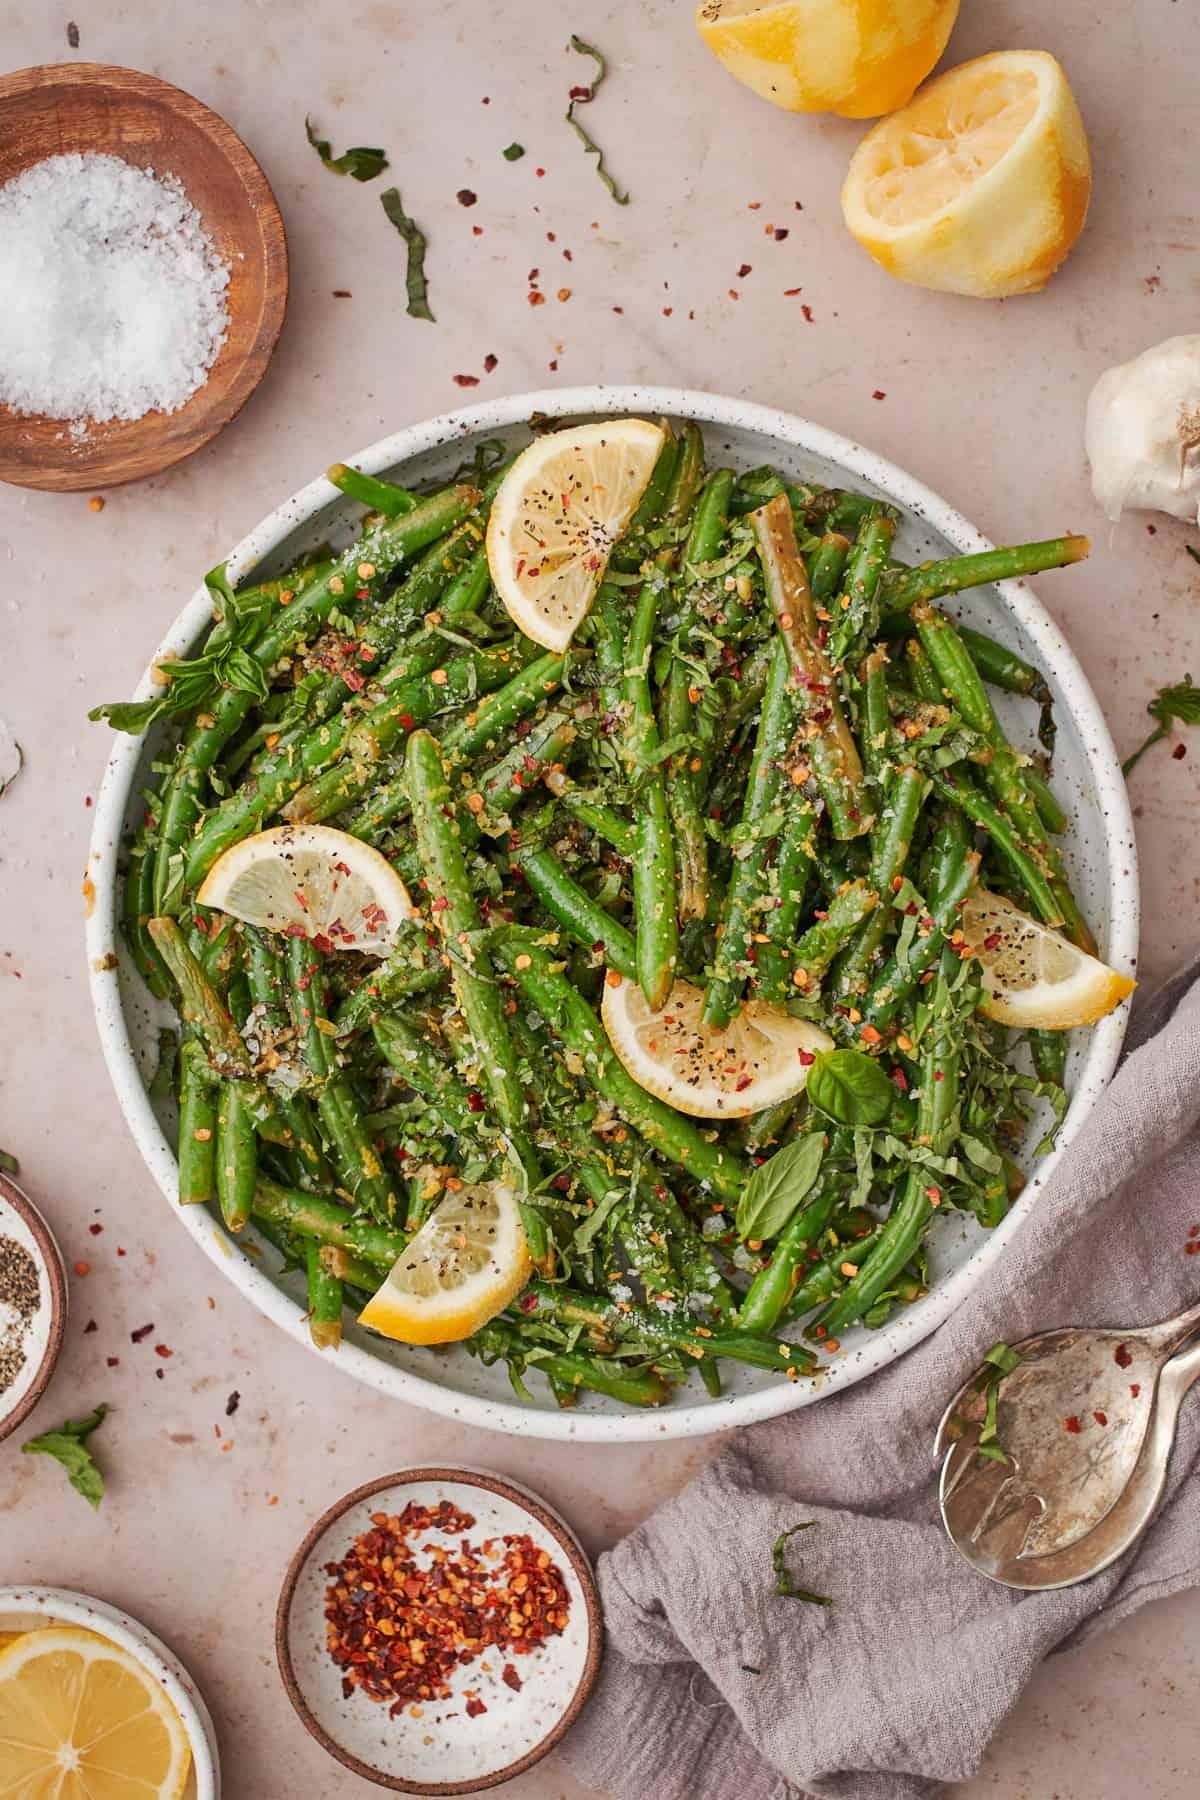 Lemon garlic green beans dish topped with lemon wedges, red pepper flakes, basil, and other ingredients.